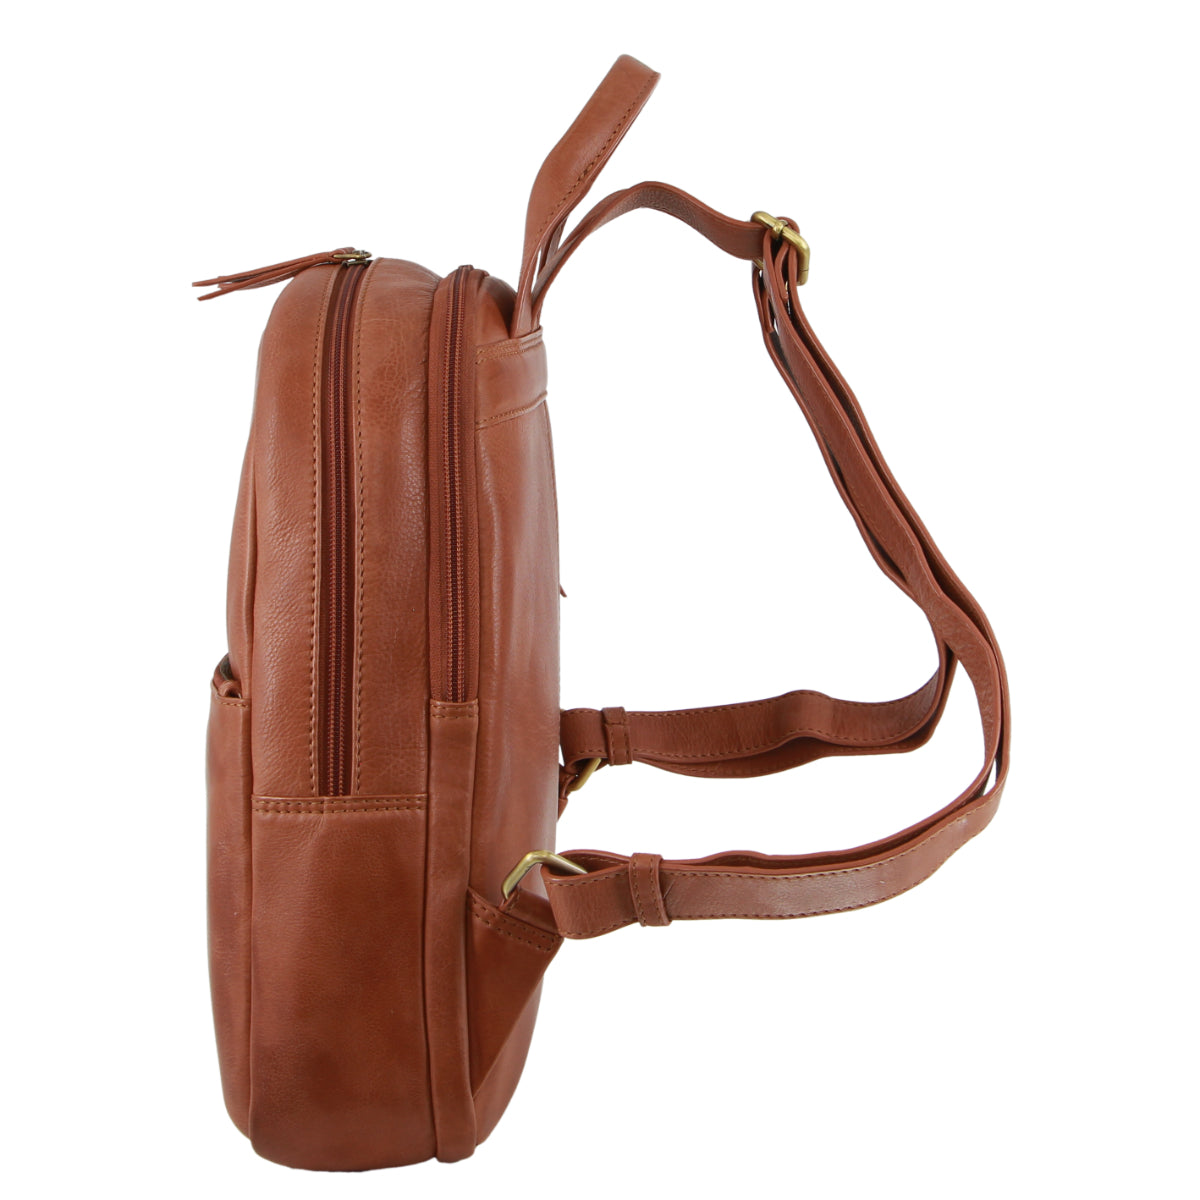 Pierre Cardin Rustic Leather Business Backpack/Computer Bag in Tan